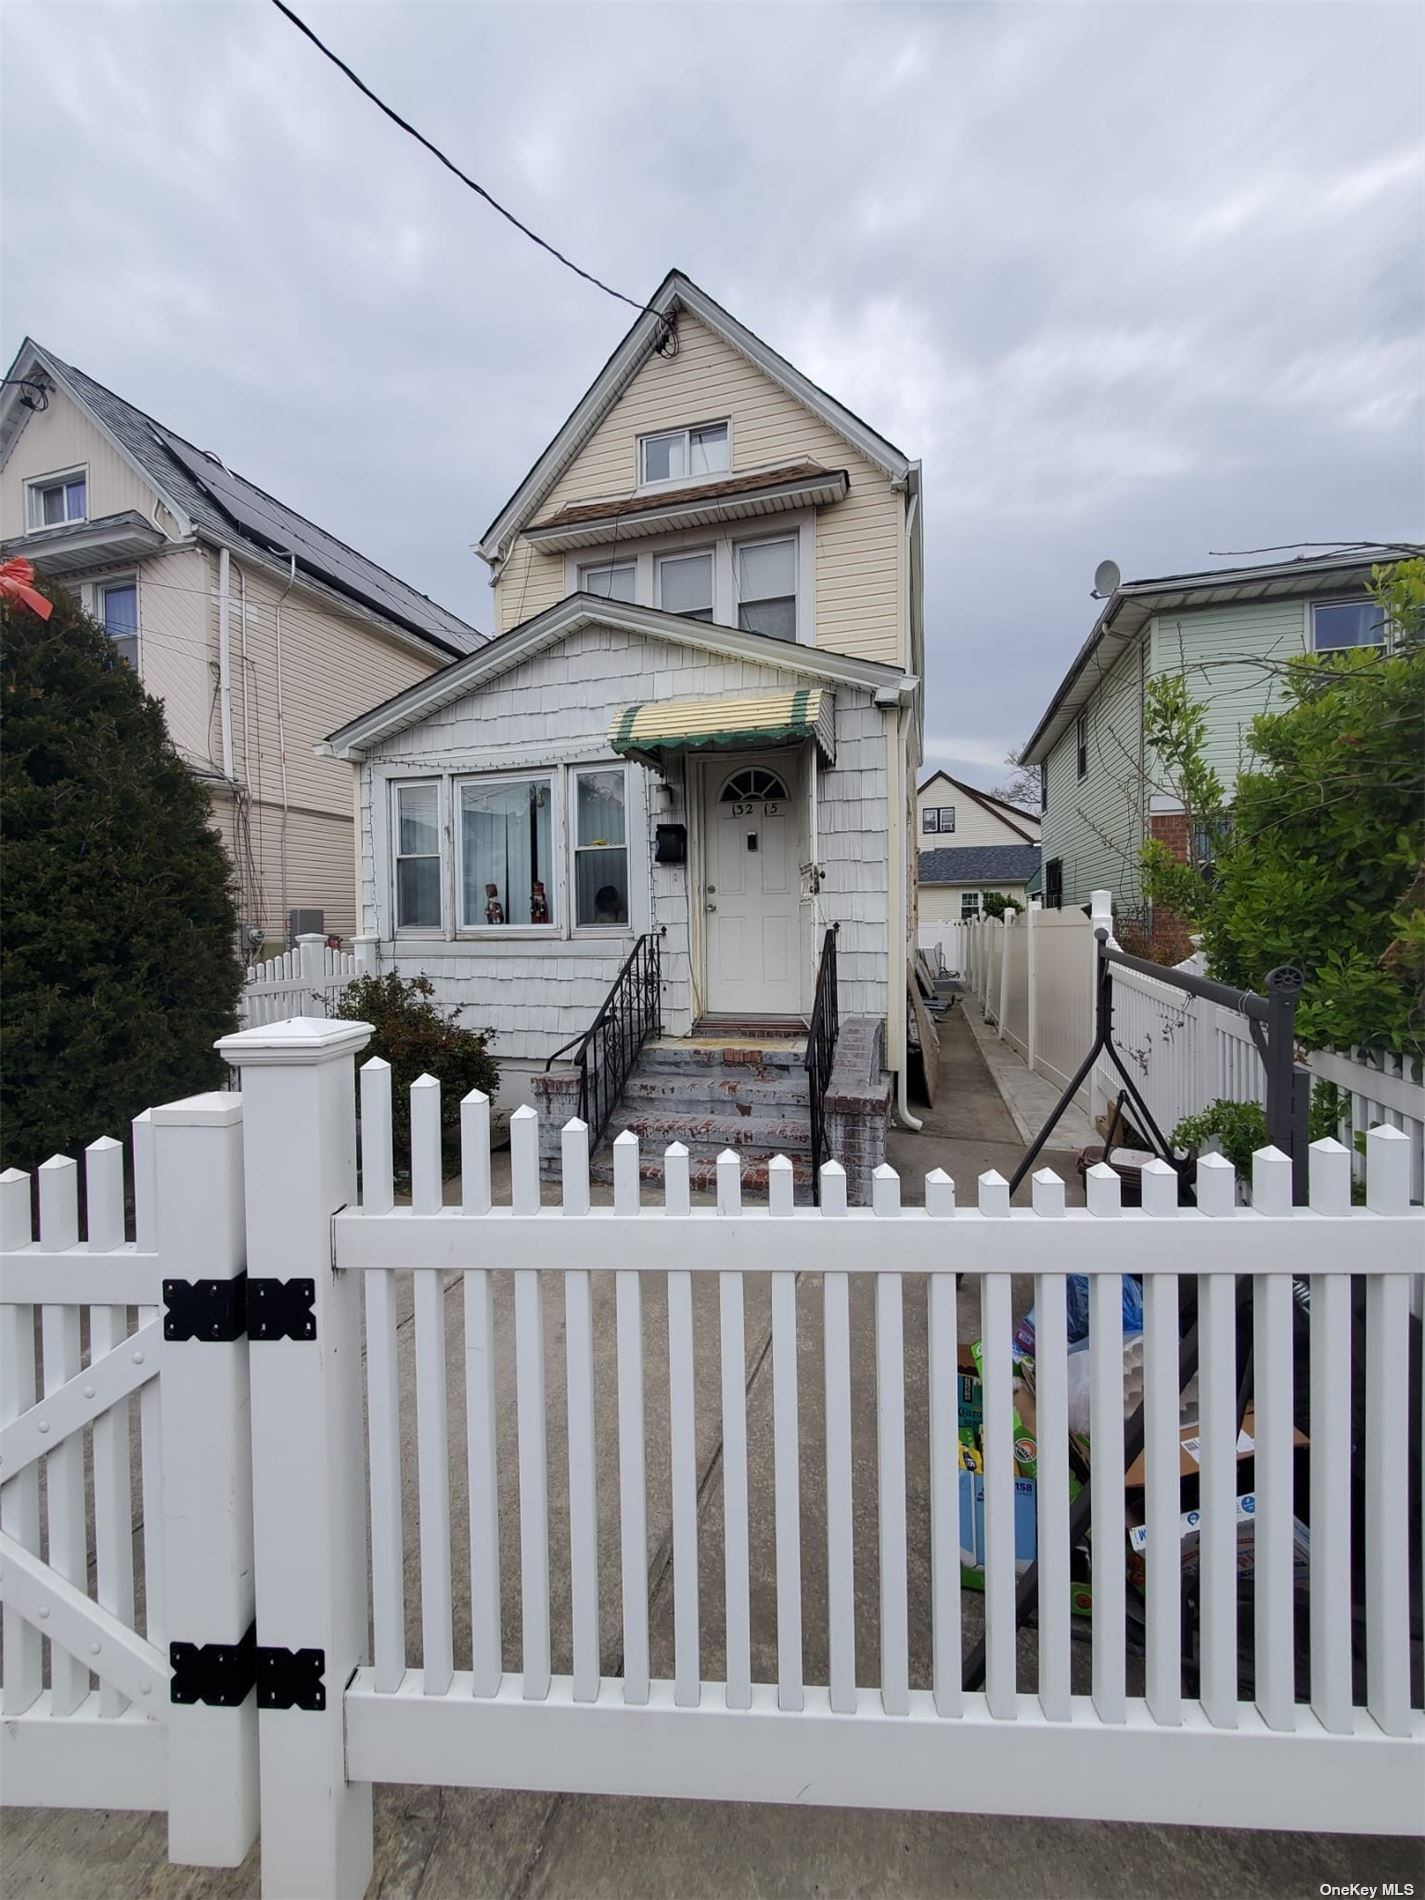 a front view of a house with fence